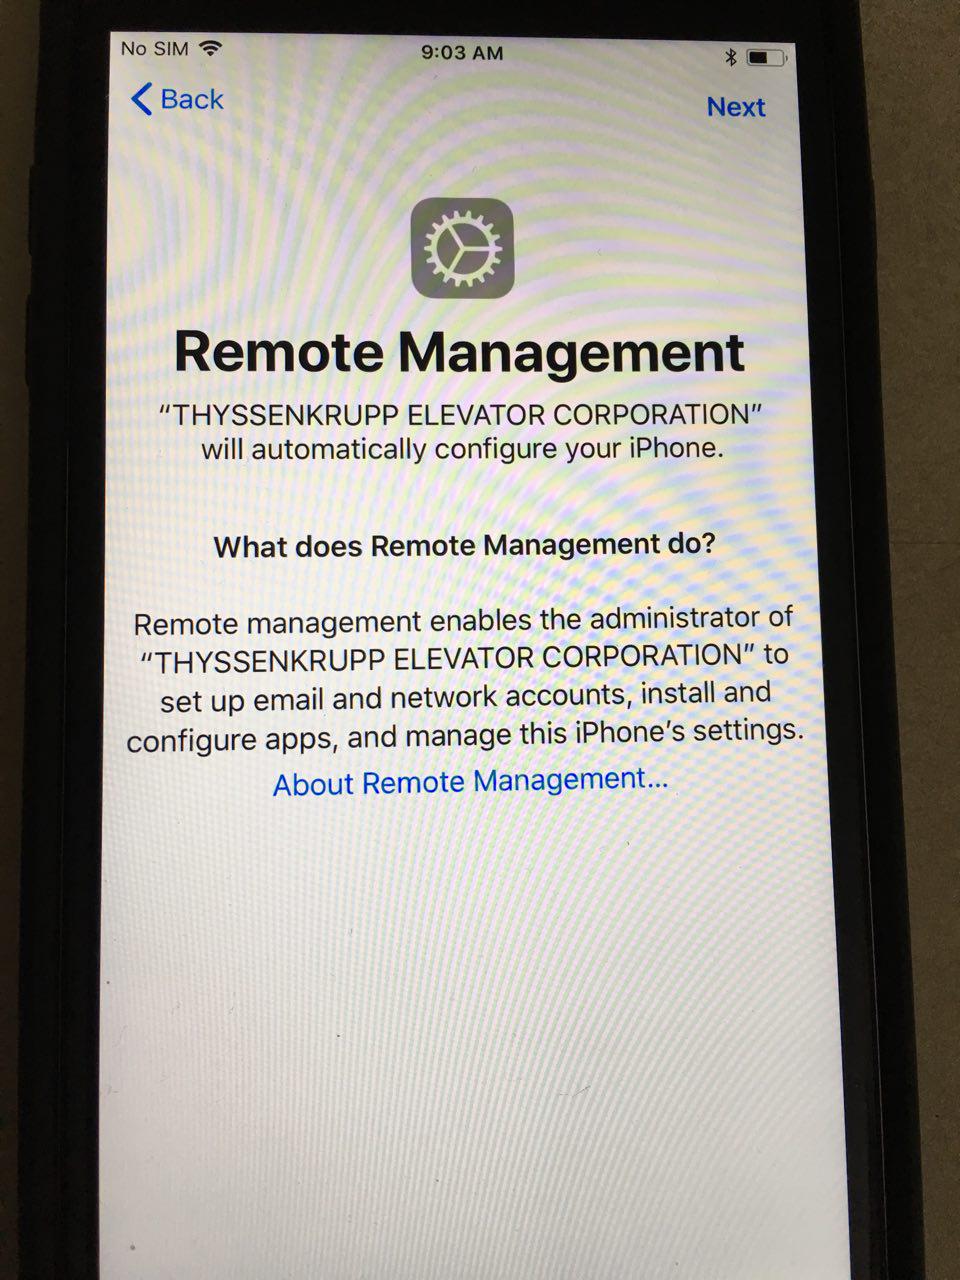 Remove Non-Removable MDM Profile from iPhone in 1 Minute